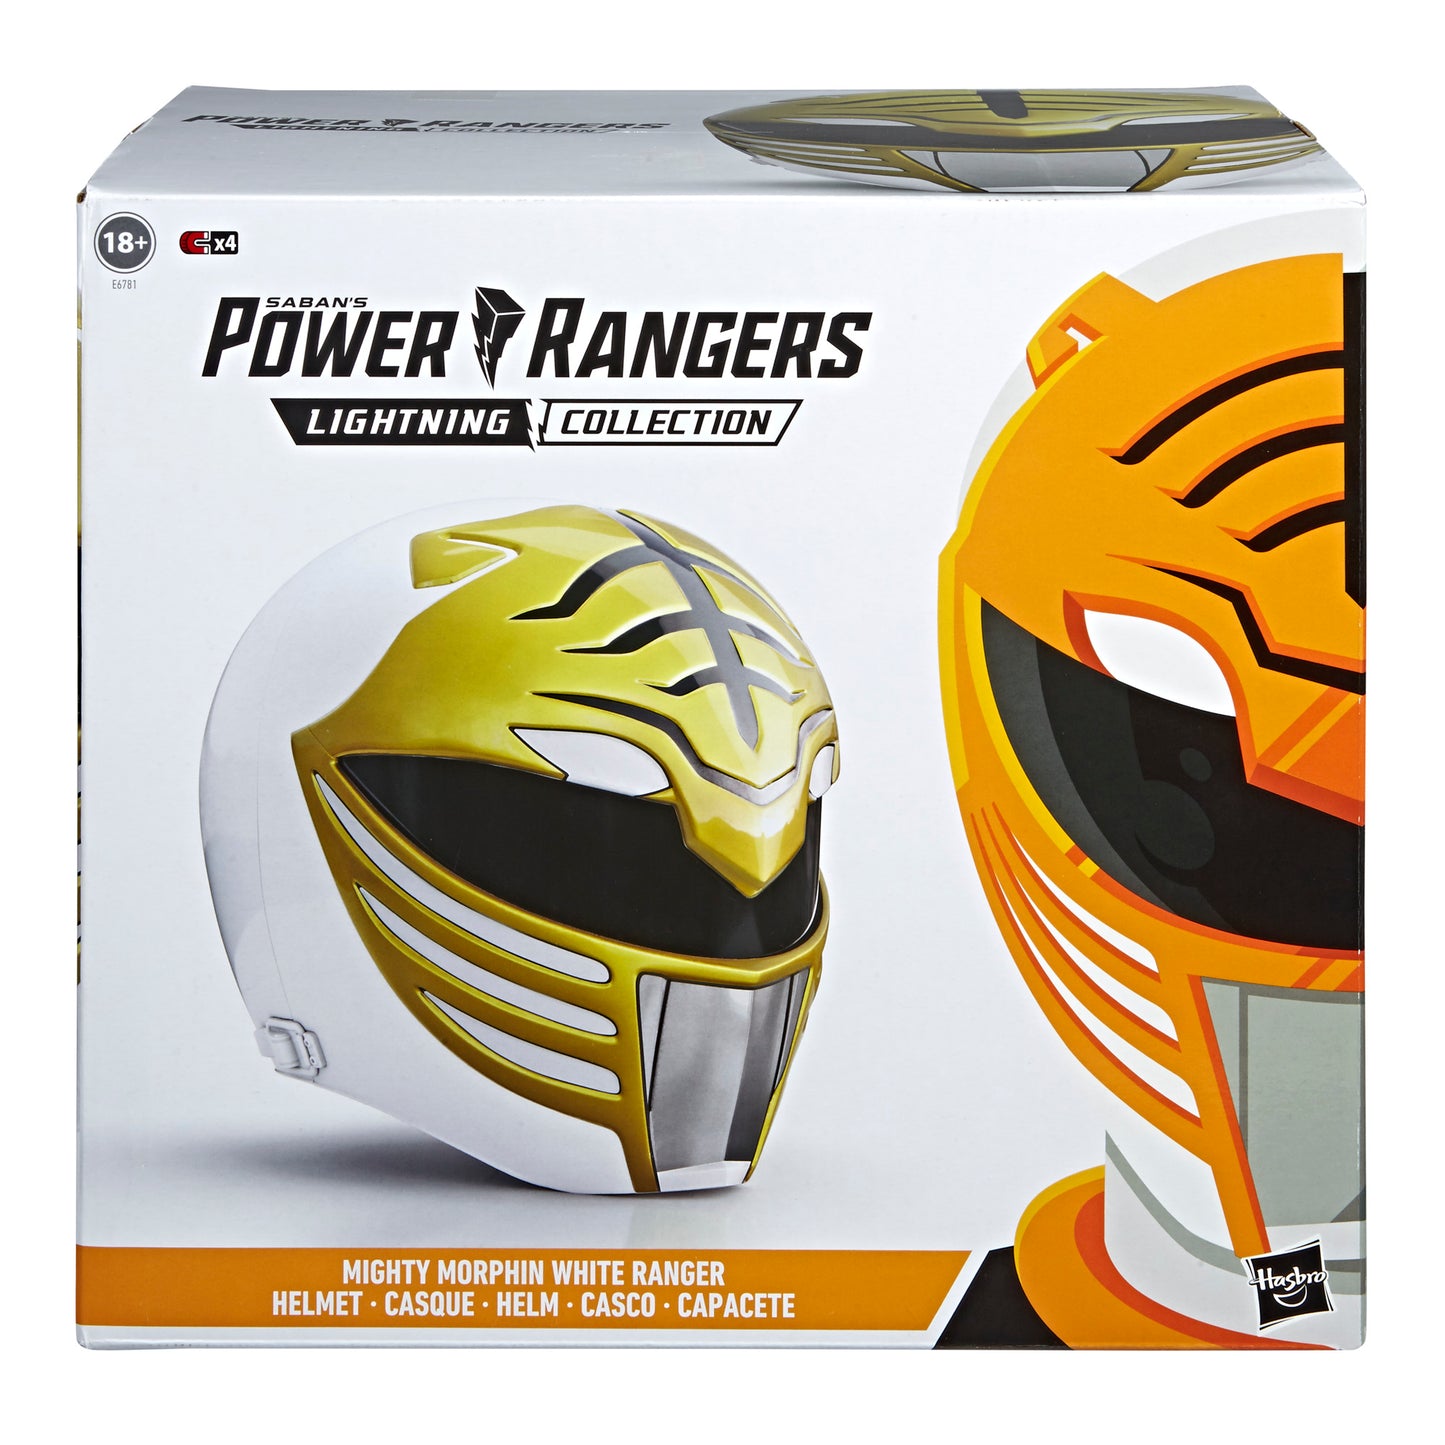 Power Rangers Lightning Collection Mighty Morphin White Ranger Helmet in a box - Heretoserveyou